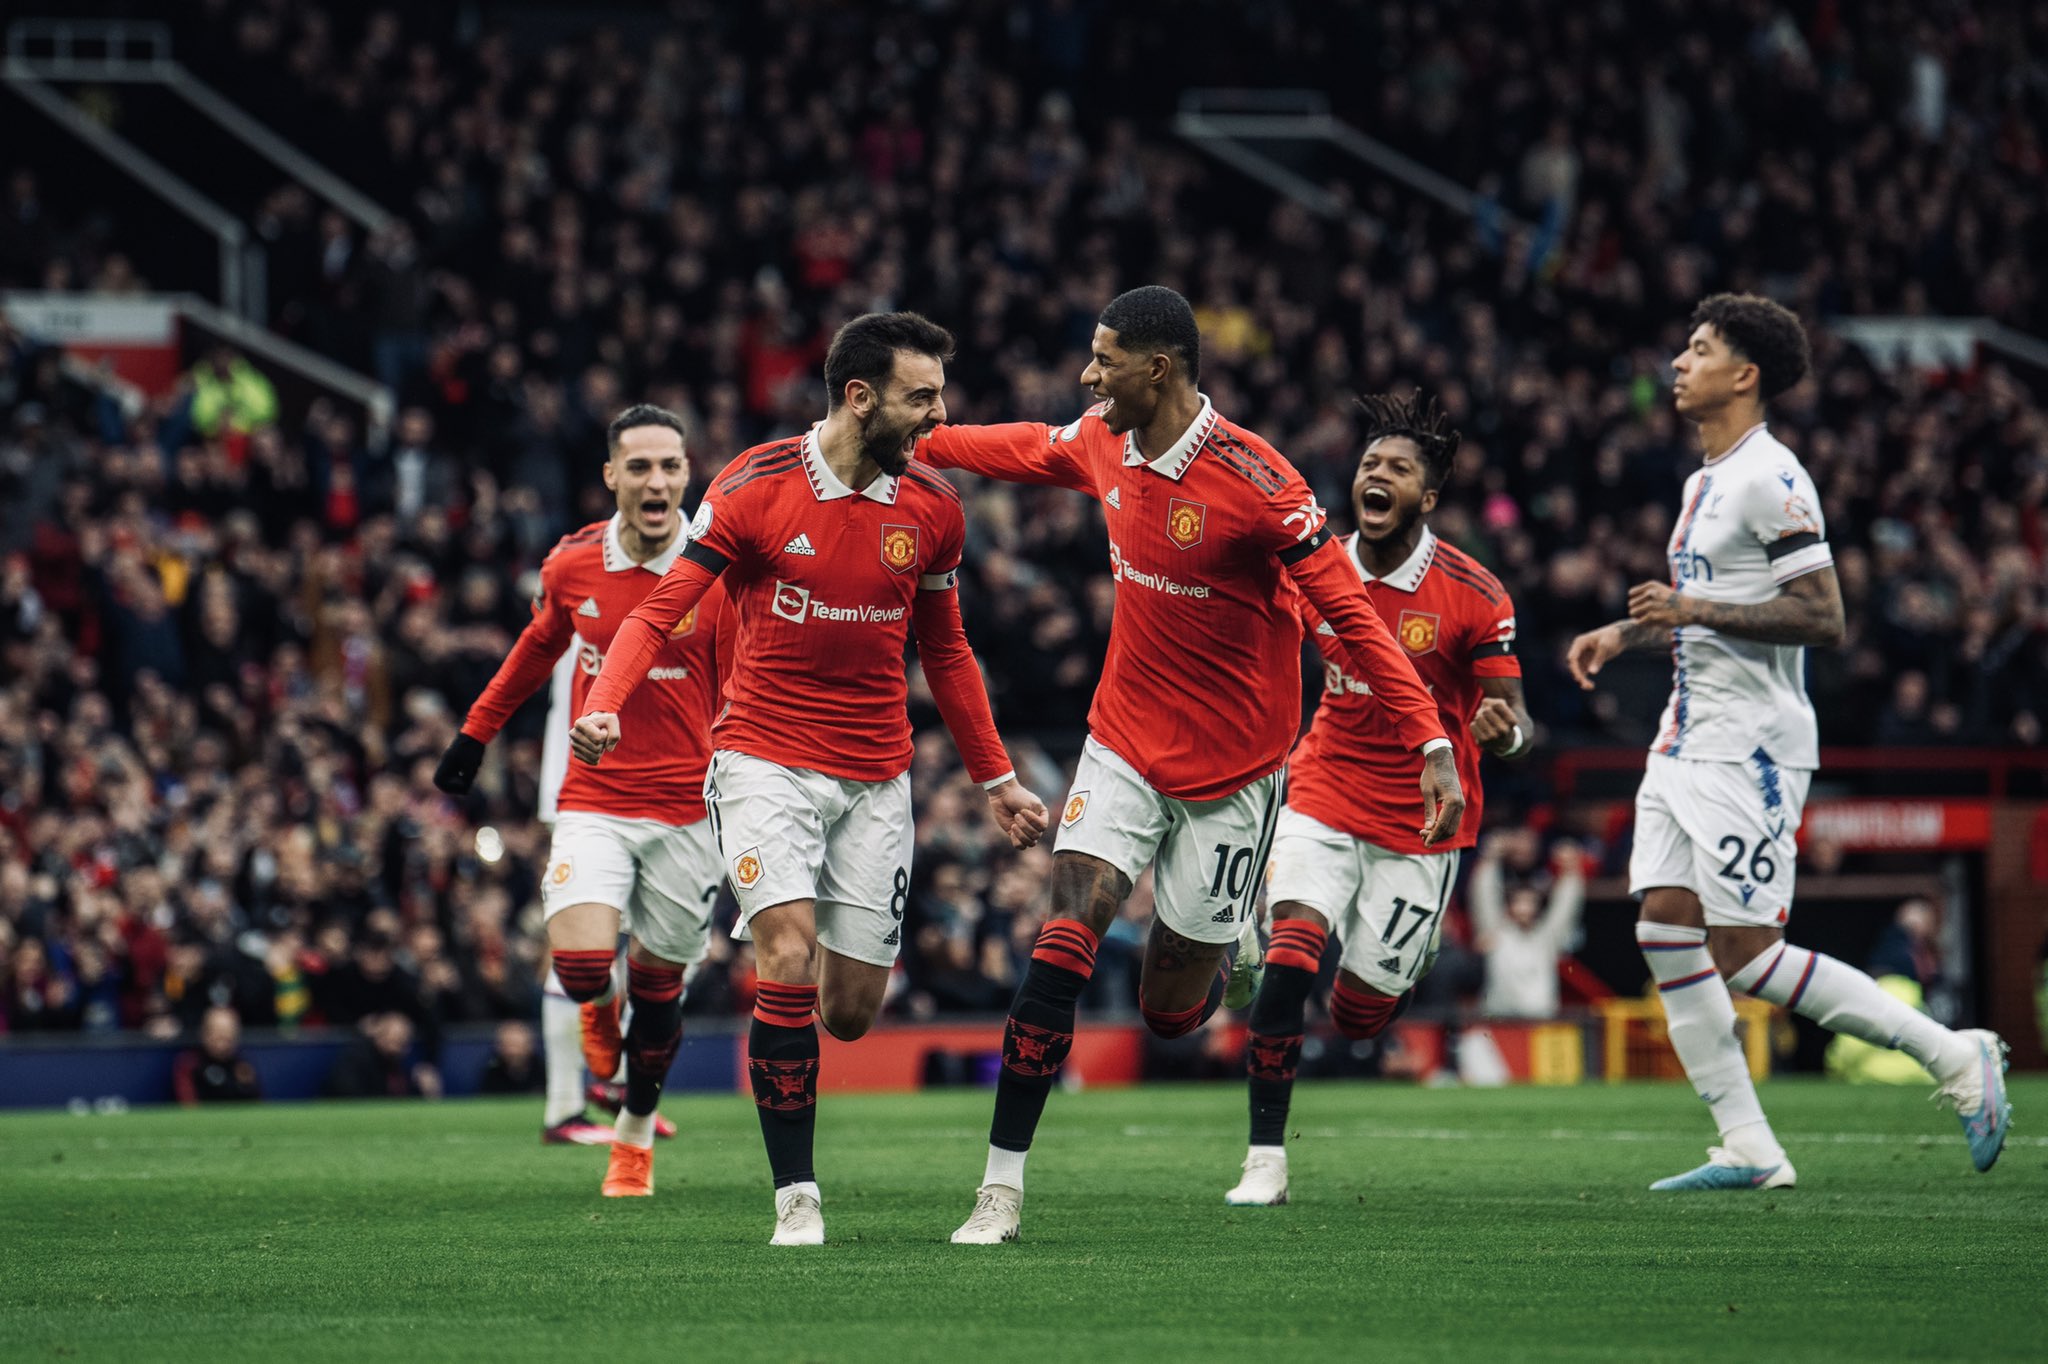 Manchester United 2 - 1 Crystal Palace